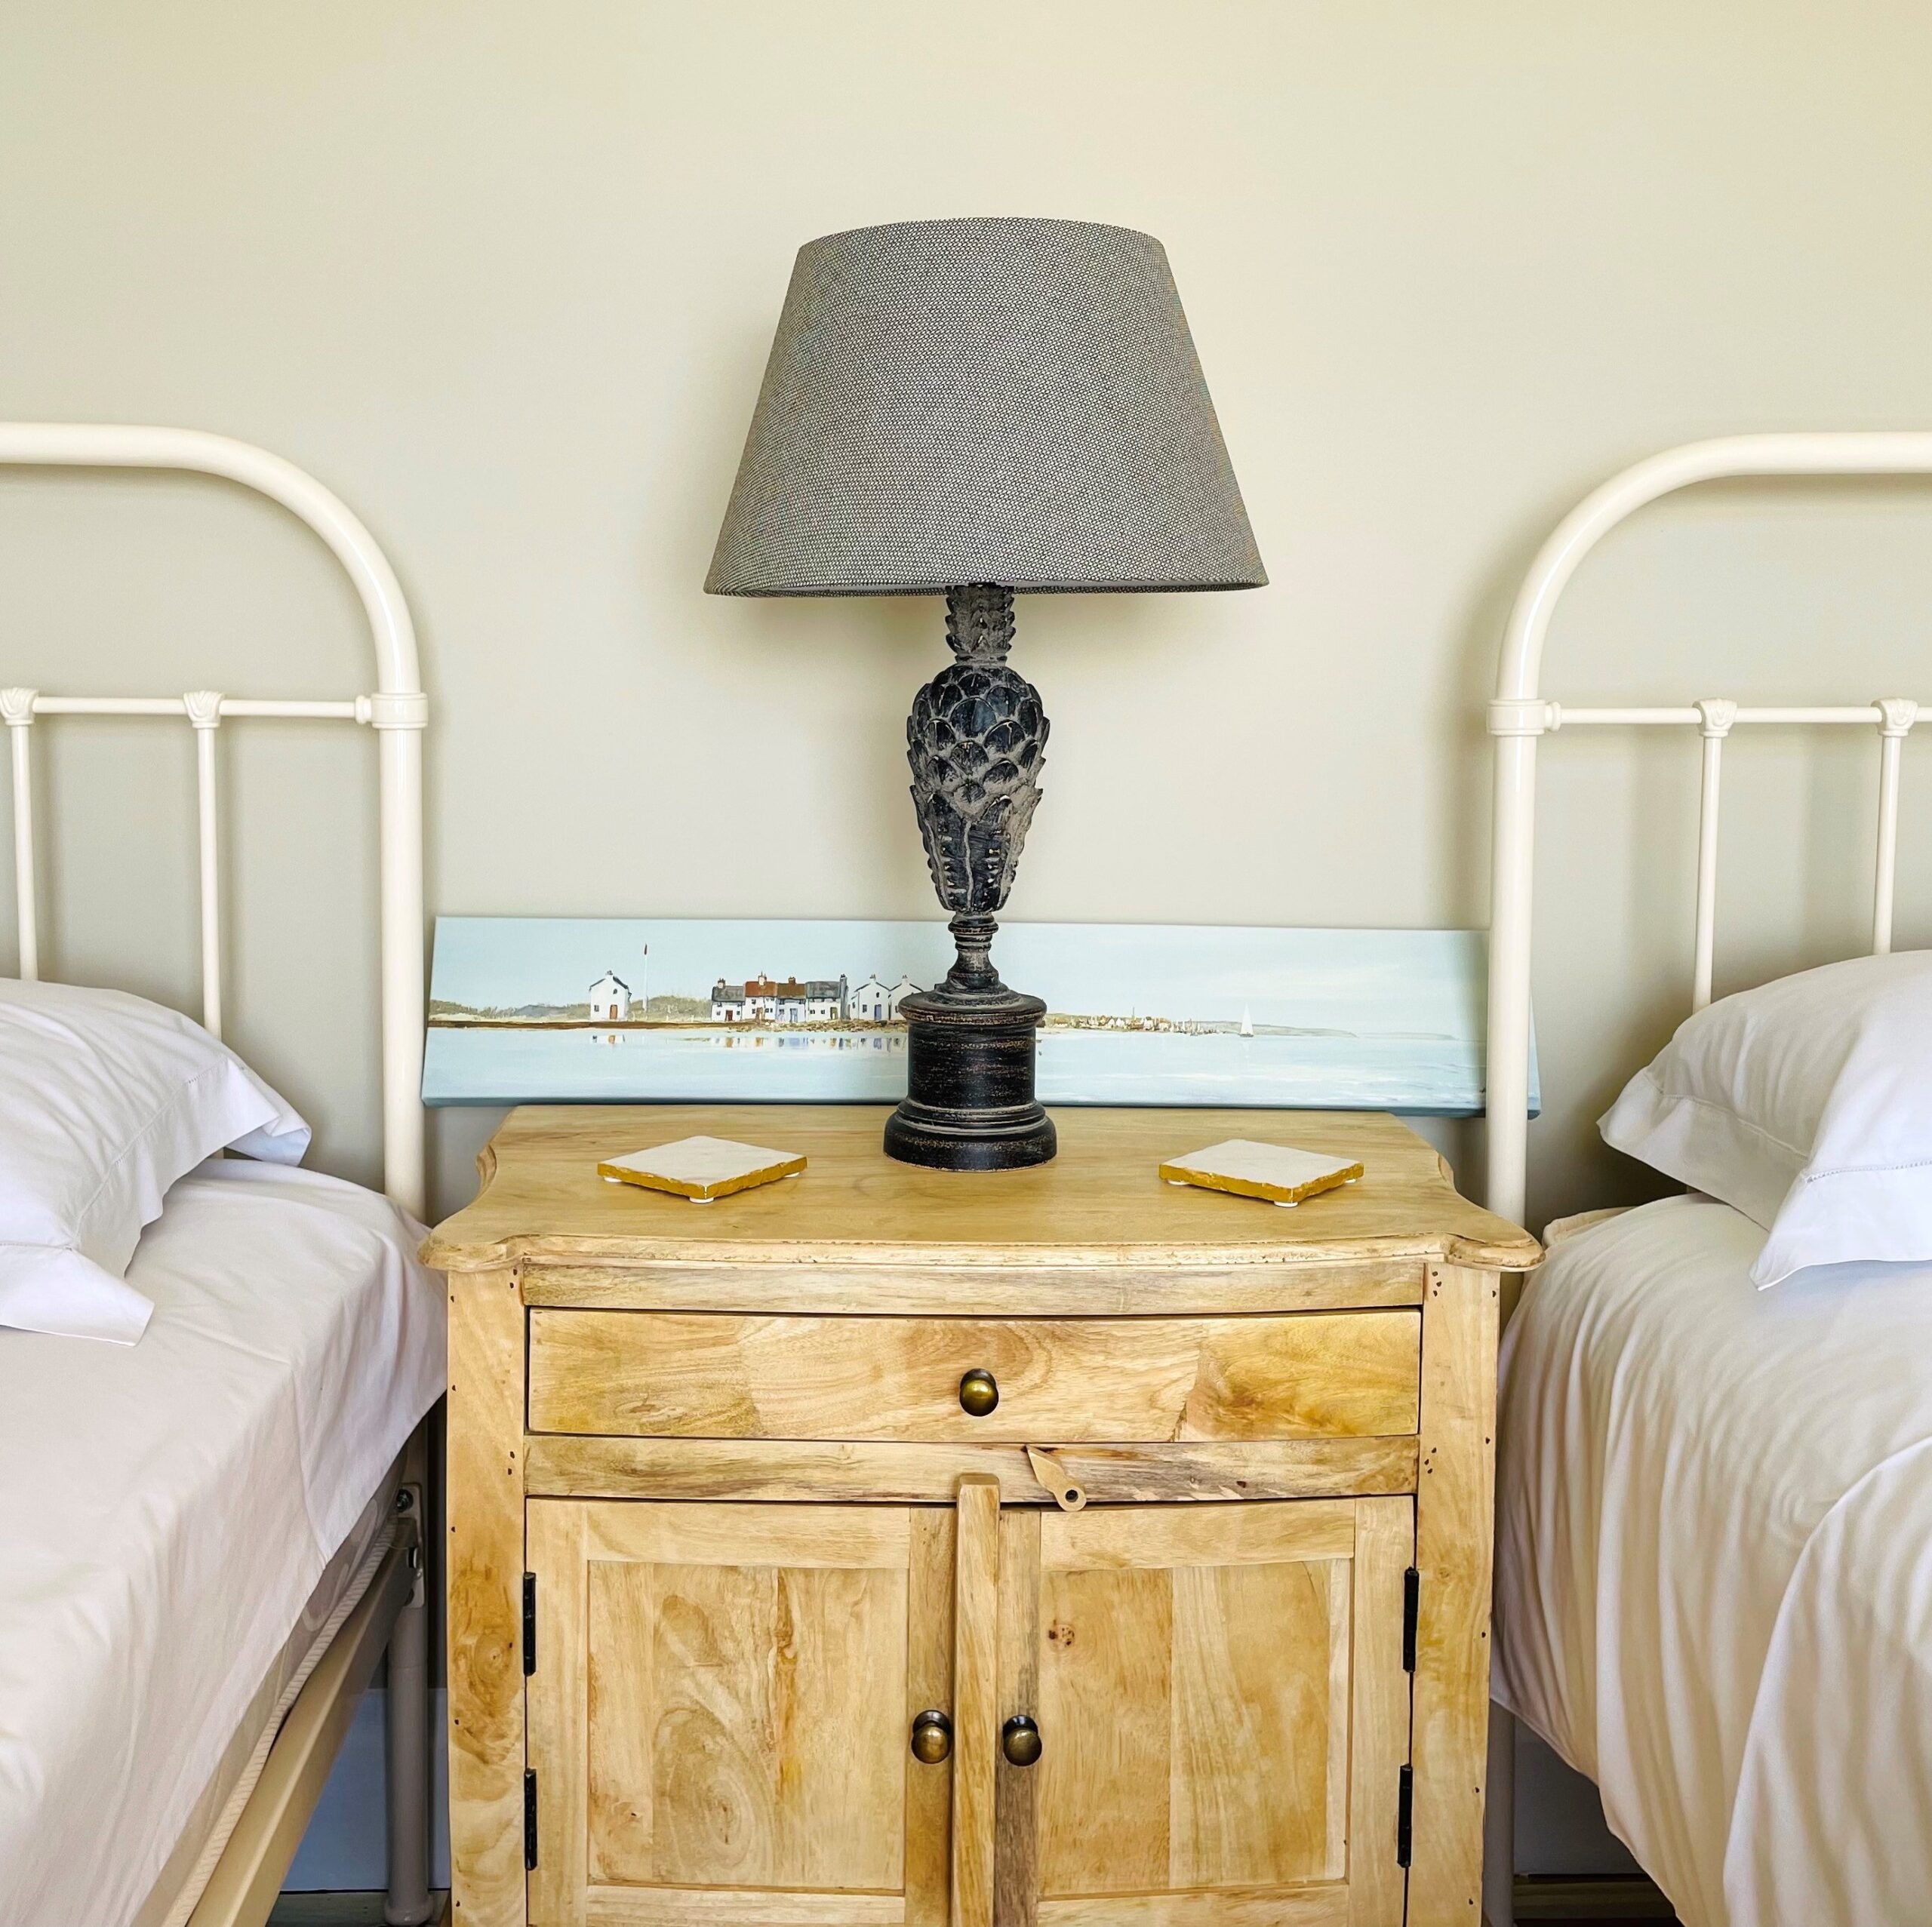 Large wooden Eden bedside table between beds with lamp